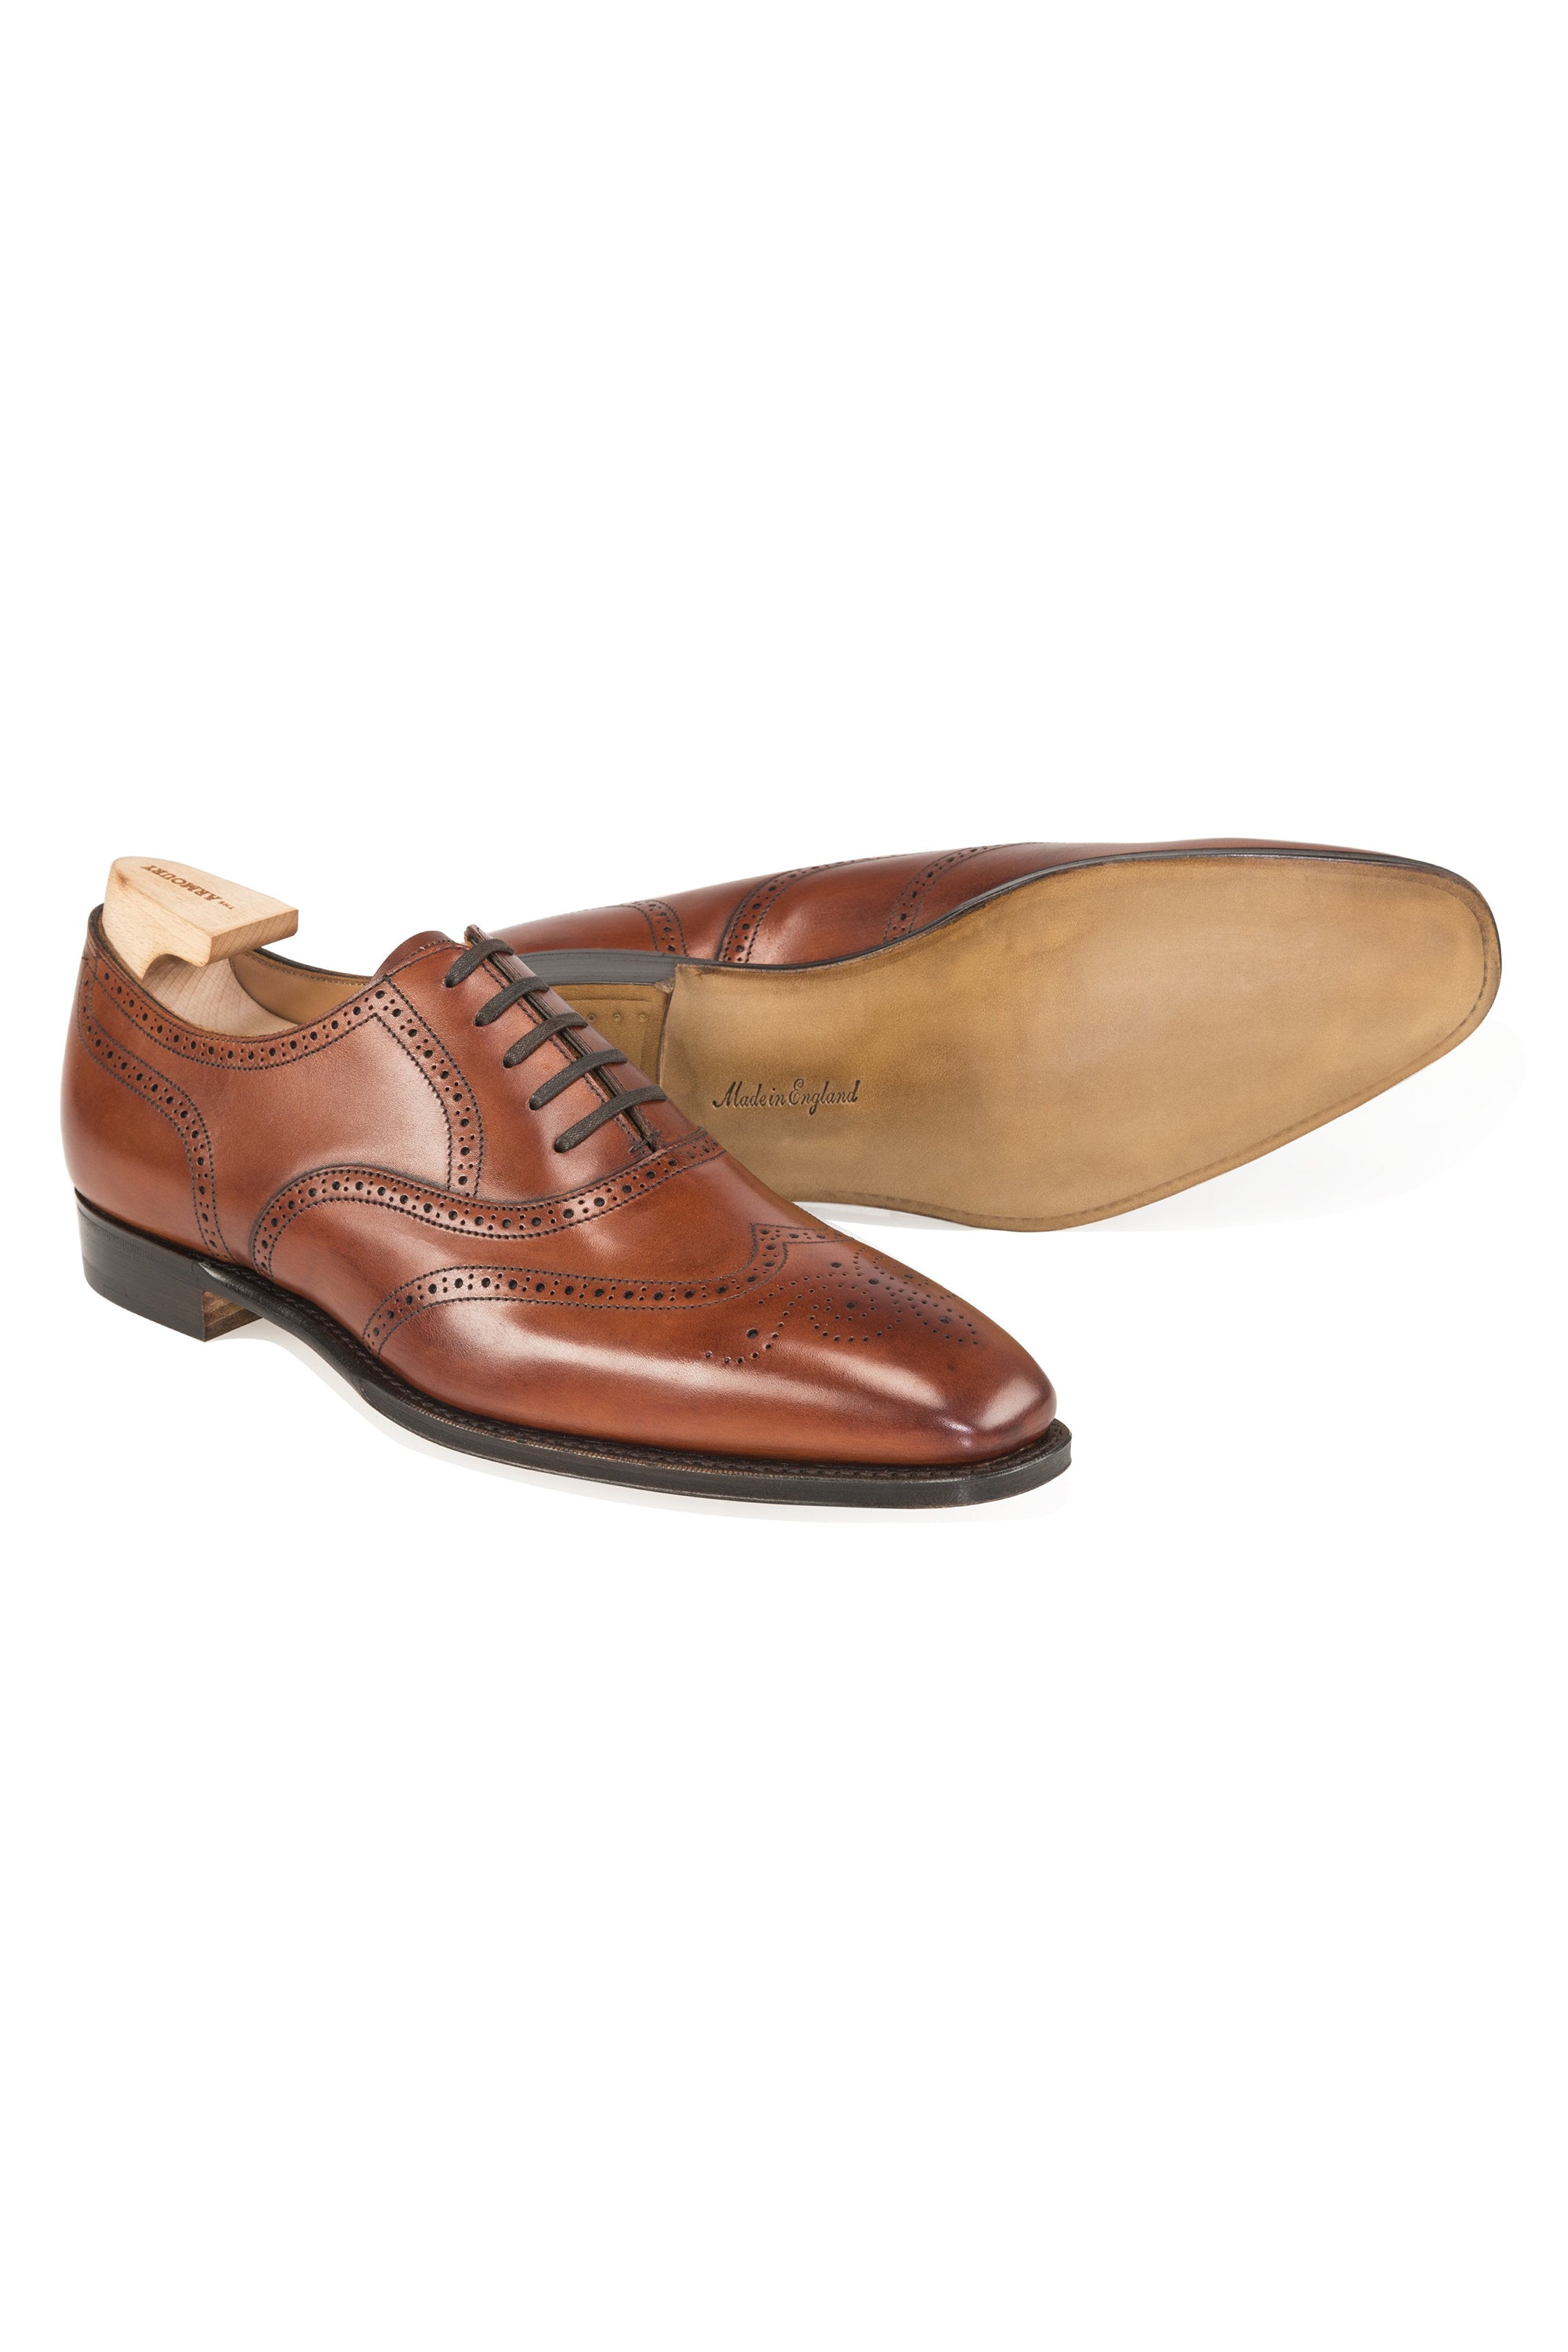 The Armoury Hajime 101579 Gloucester Chestnut Calf Oxford Shoes *factory seconds*